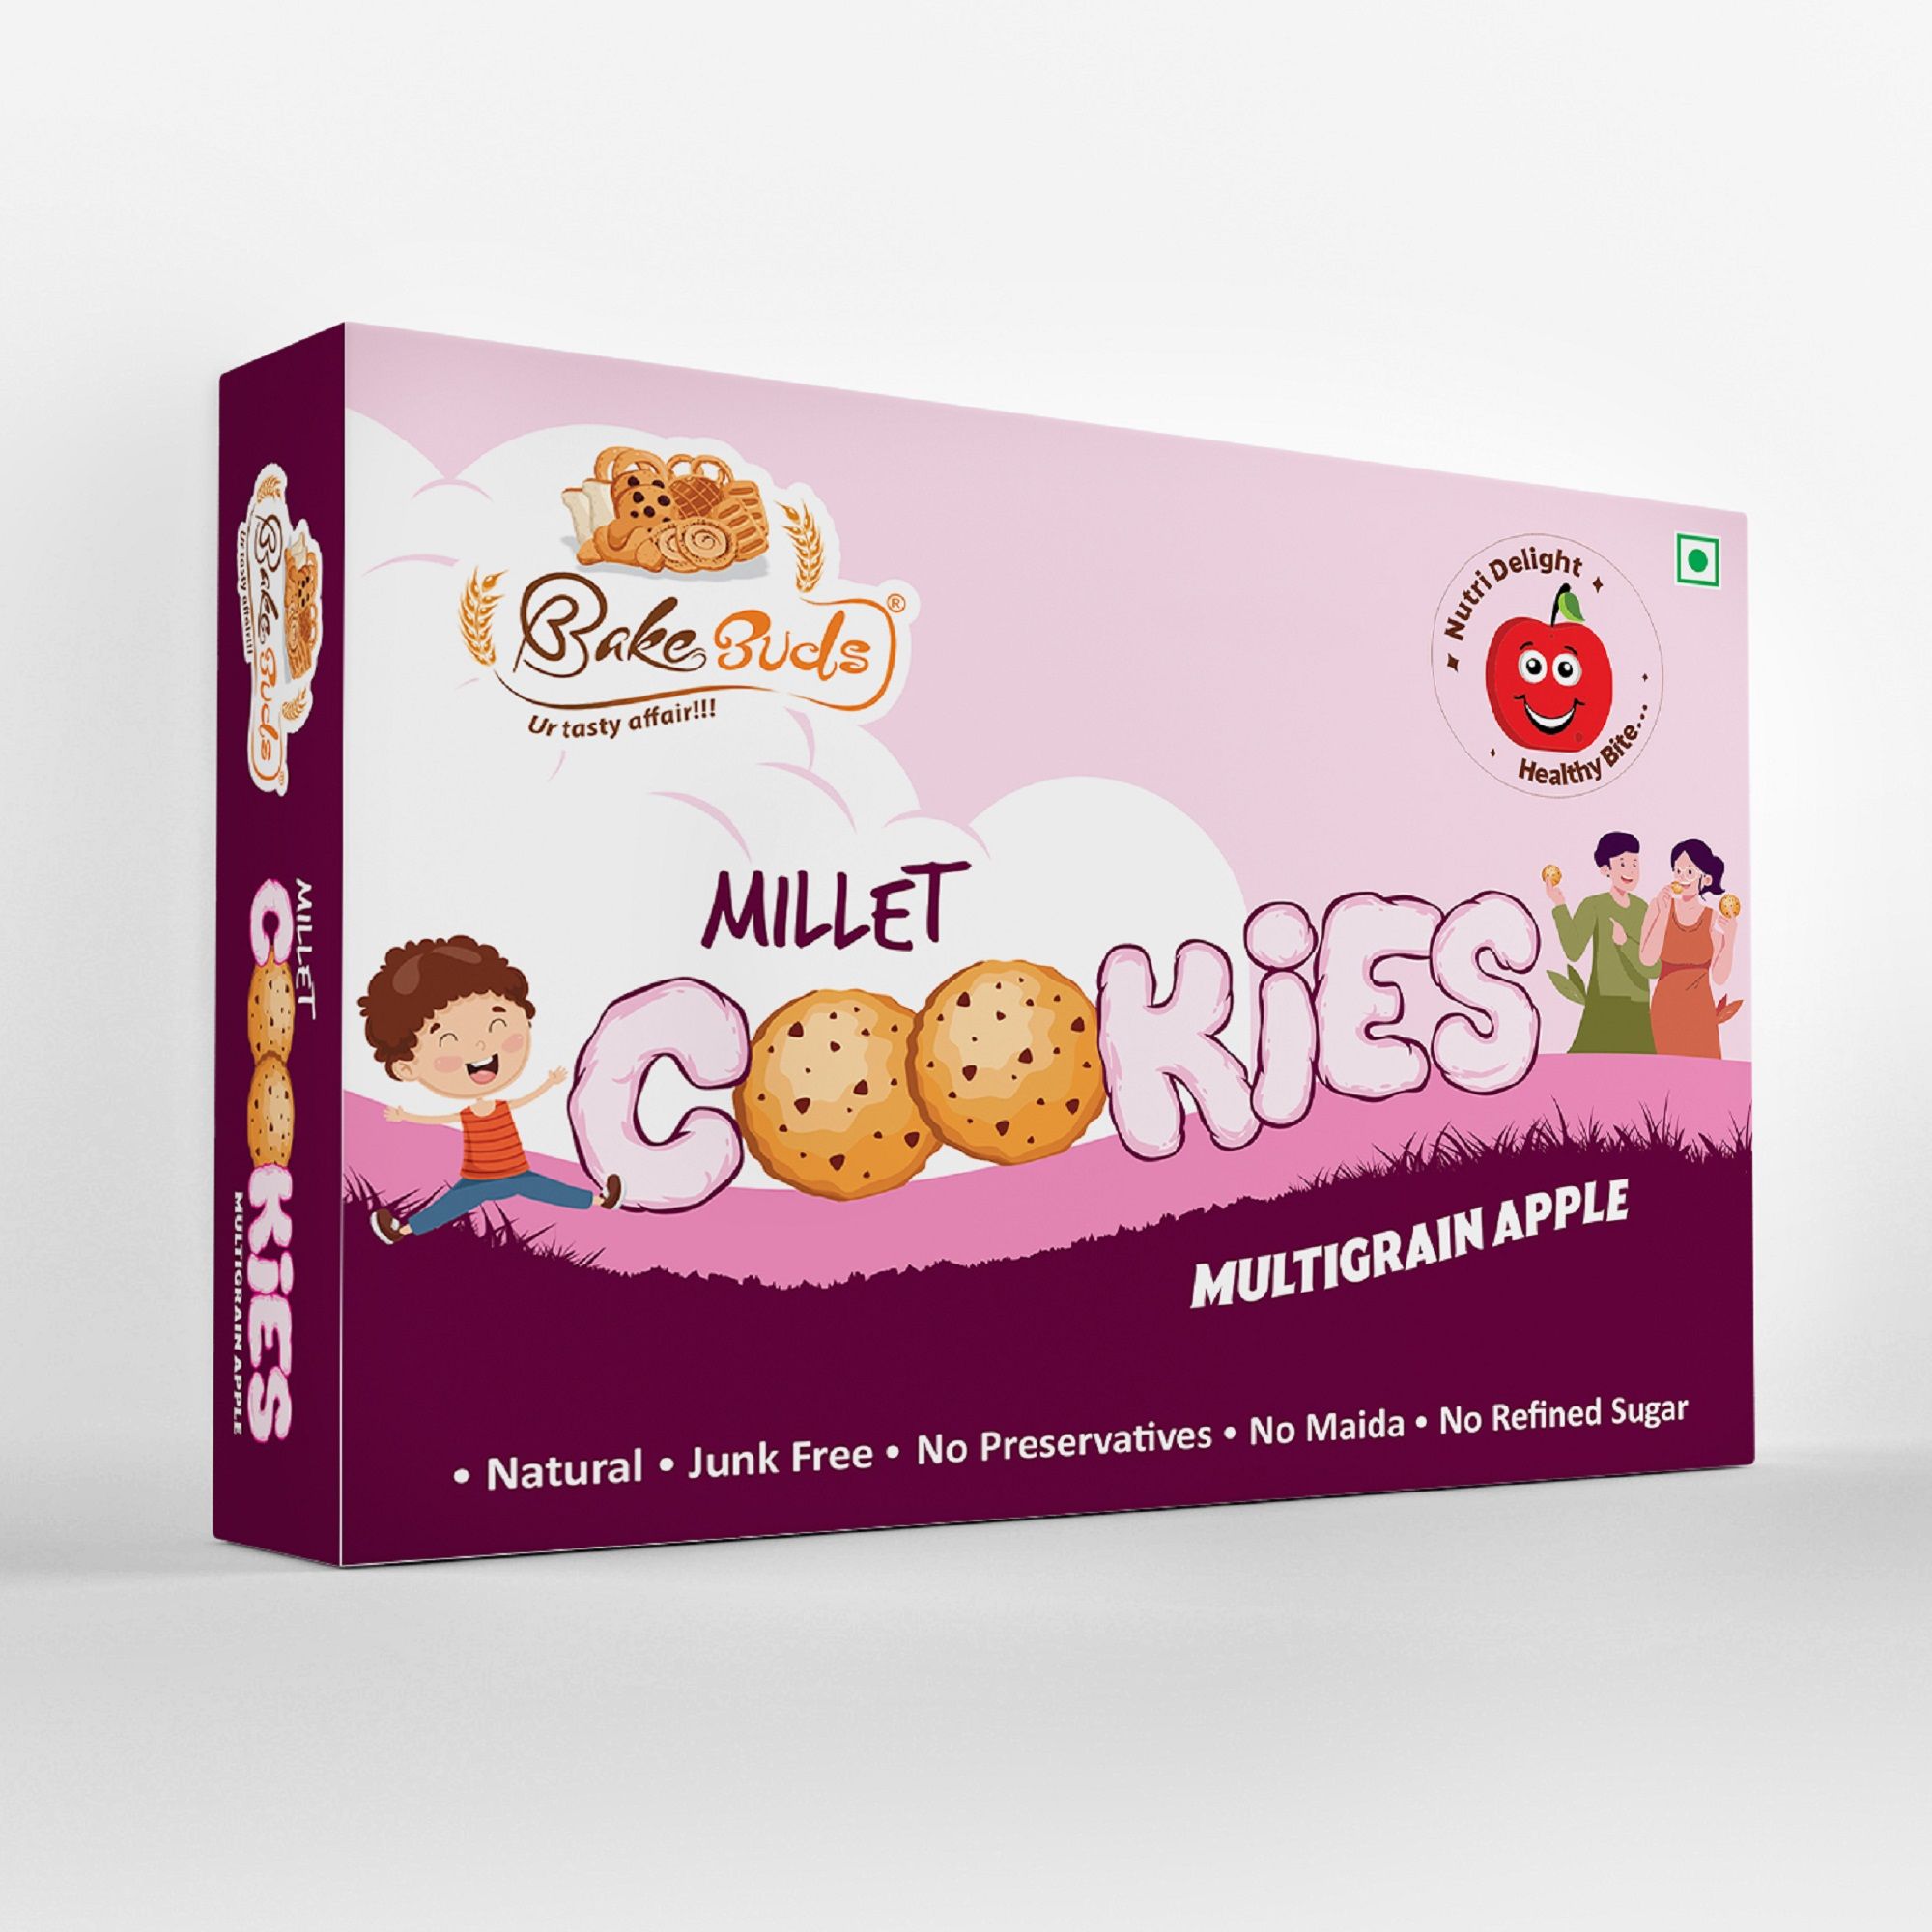 Bake Buds Millet Cookies-Multigrain Apple | Natural,Tasty and Nutritious | Cookies for Kids and Adults| Anytime Millet Snacks-160 gms